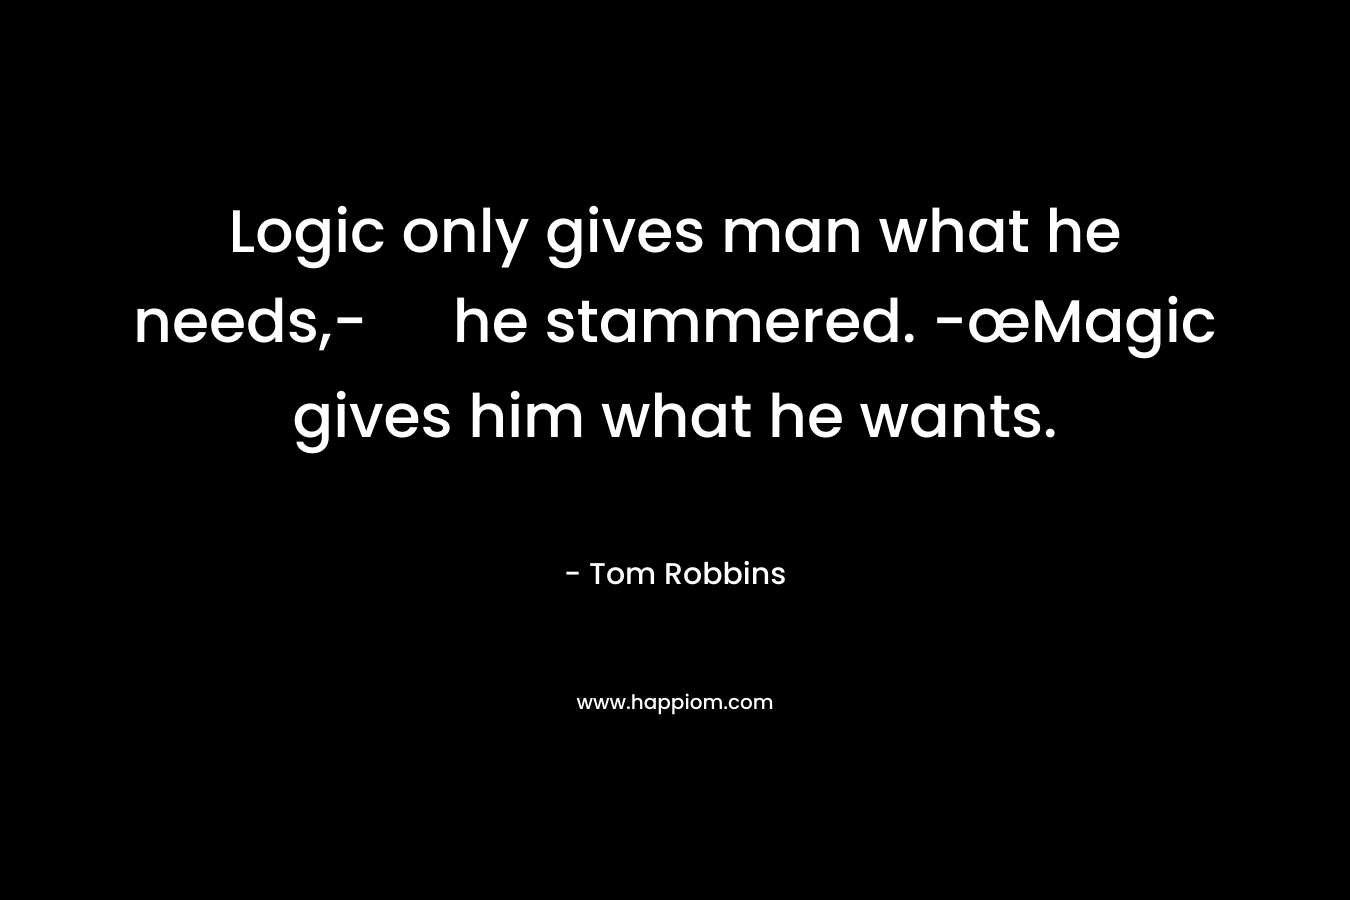 Logic only gives man what he needs,- he stammered. -œMagic gives him what he wants.